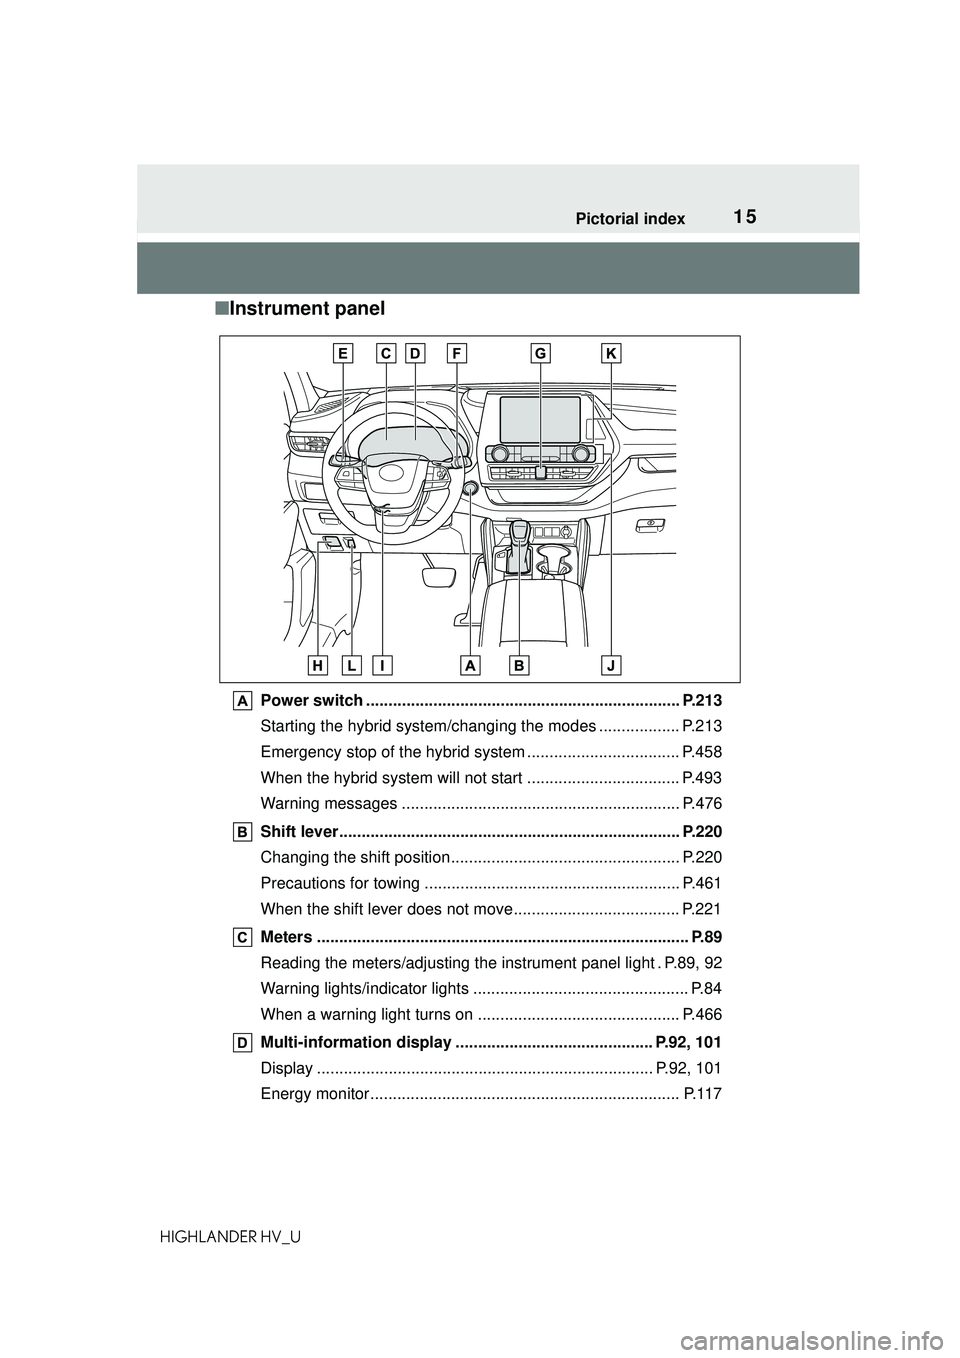 TOYOTA HIGHLANDER HYBRID 2021  Owners Manual (in English) 15Pictorial index
HIGHLANDER HV_U
■Instrument panel
Power switch ...................................................................... P.213
Starting the hybrid system/changi ng the modes .........